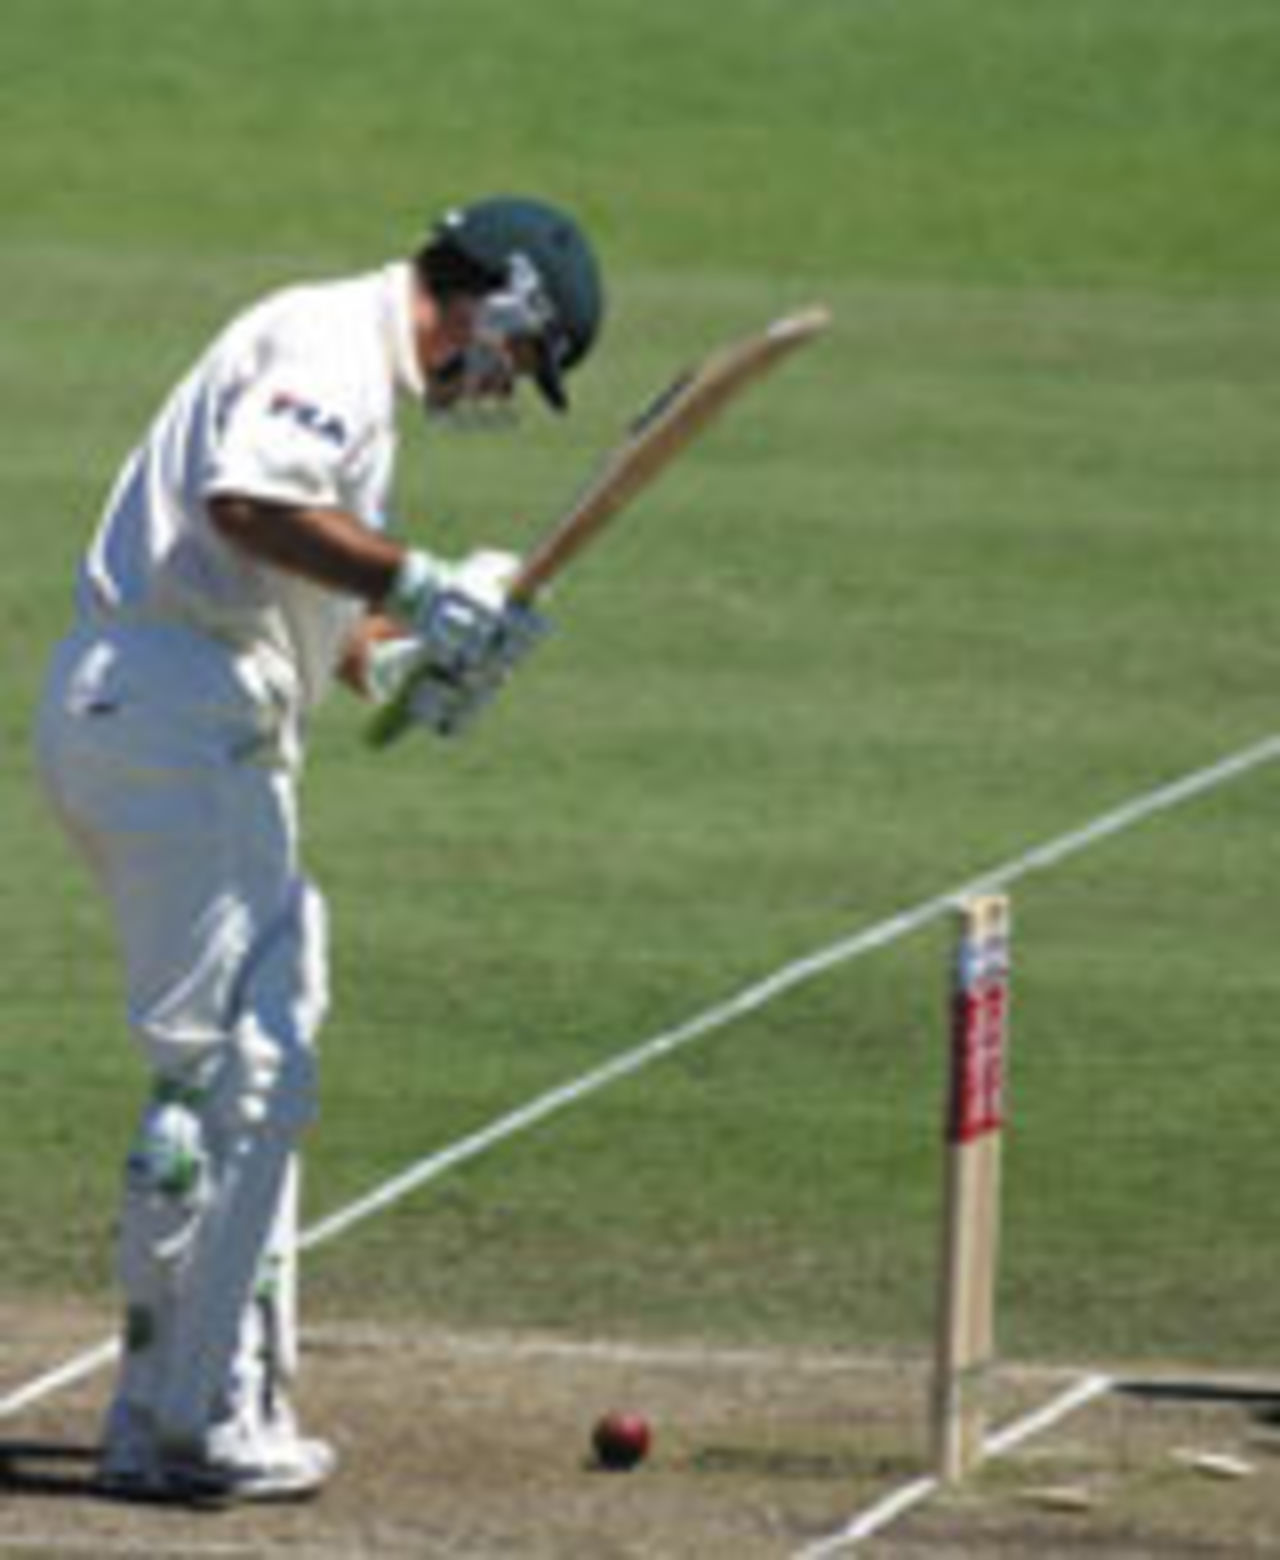 Ricky Ponting watches his dislodged bails, which brings an end to his innings of 169, Australia v Zimbabwe, 2nd Test, Sydney, 3rd day, October 19, 2003